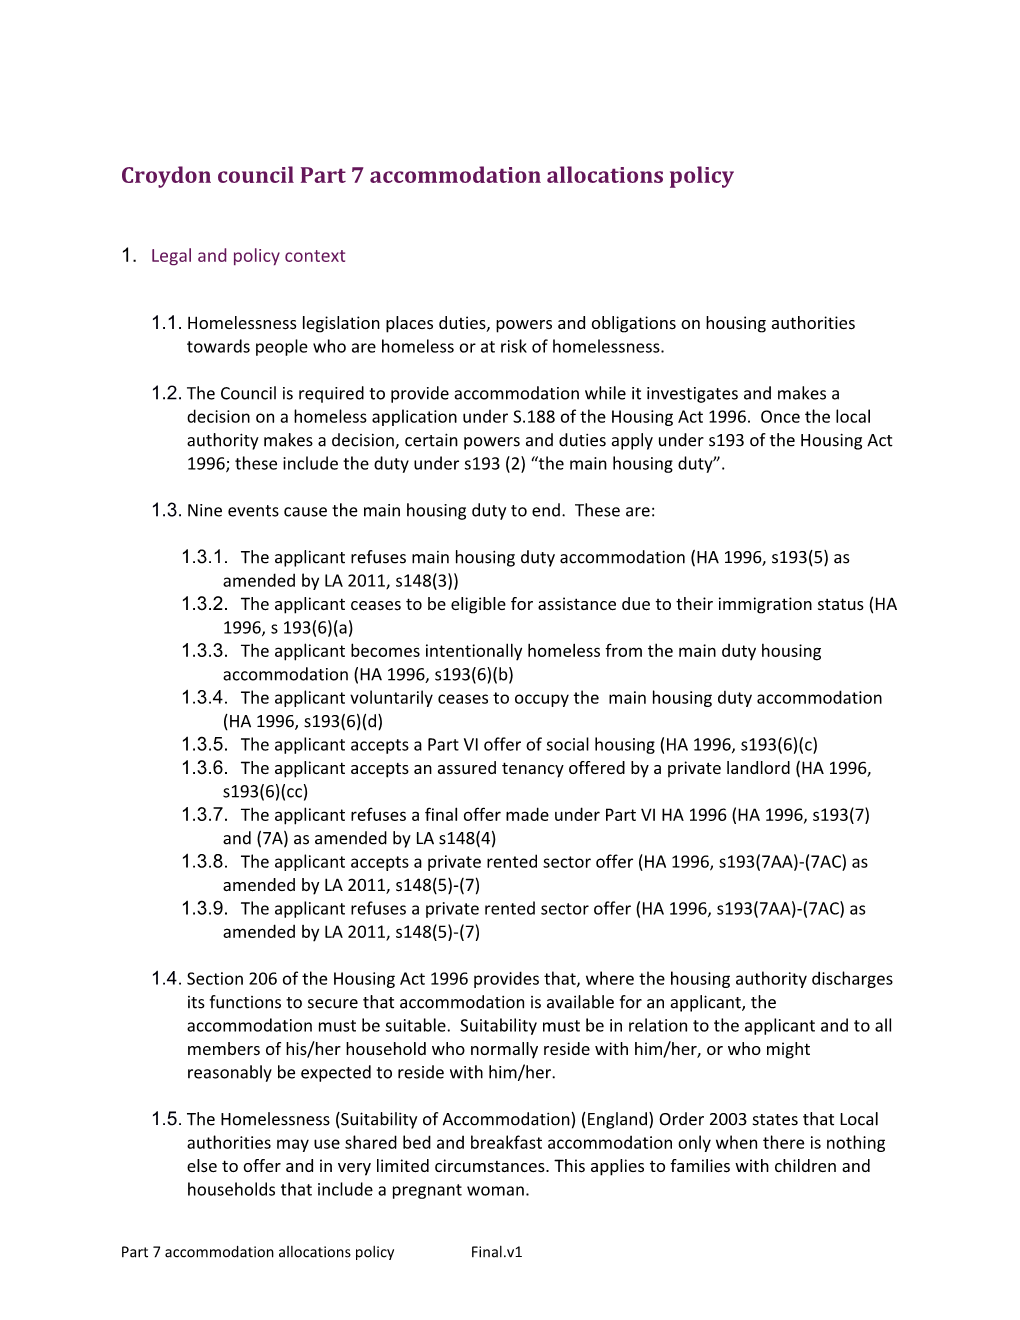 Part 7 Accommodation Allocations Policy